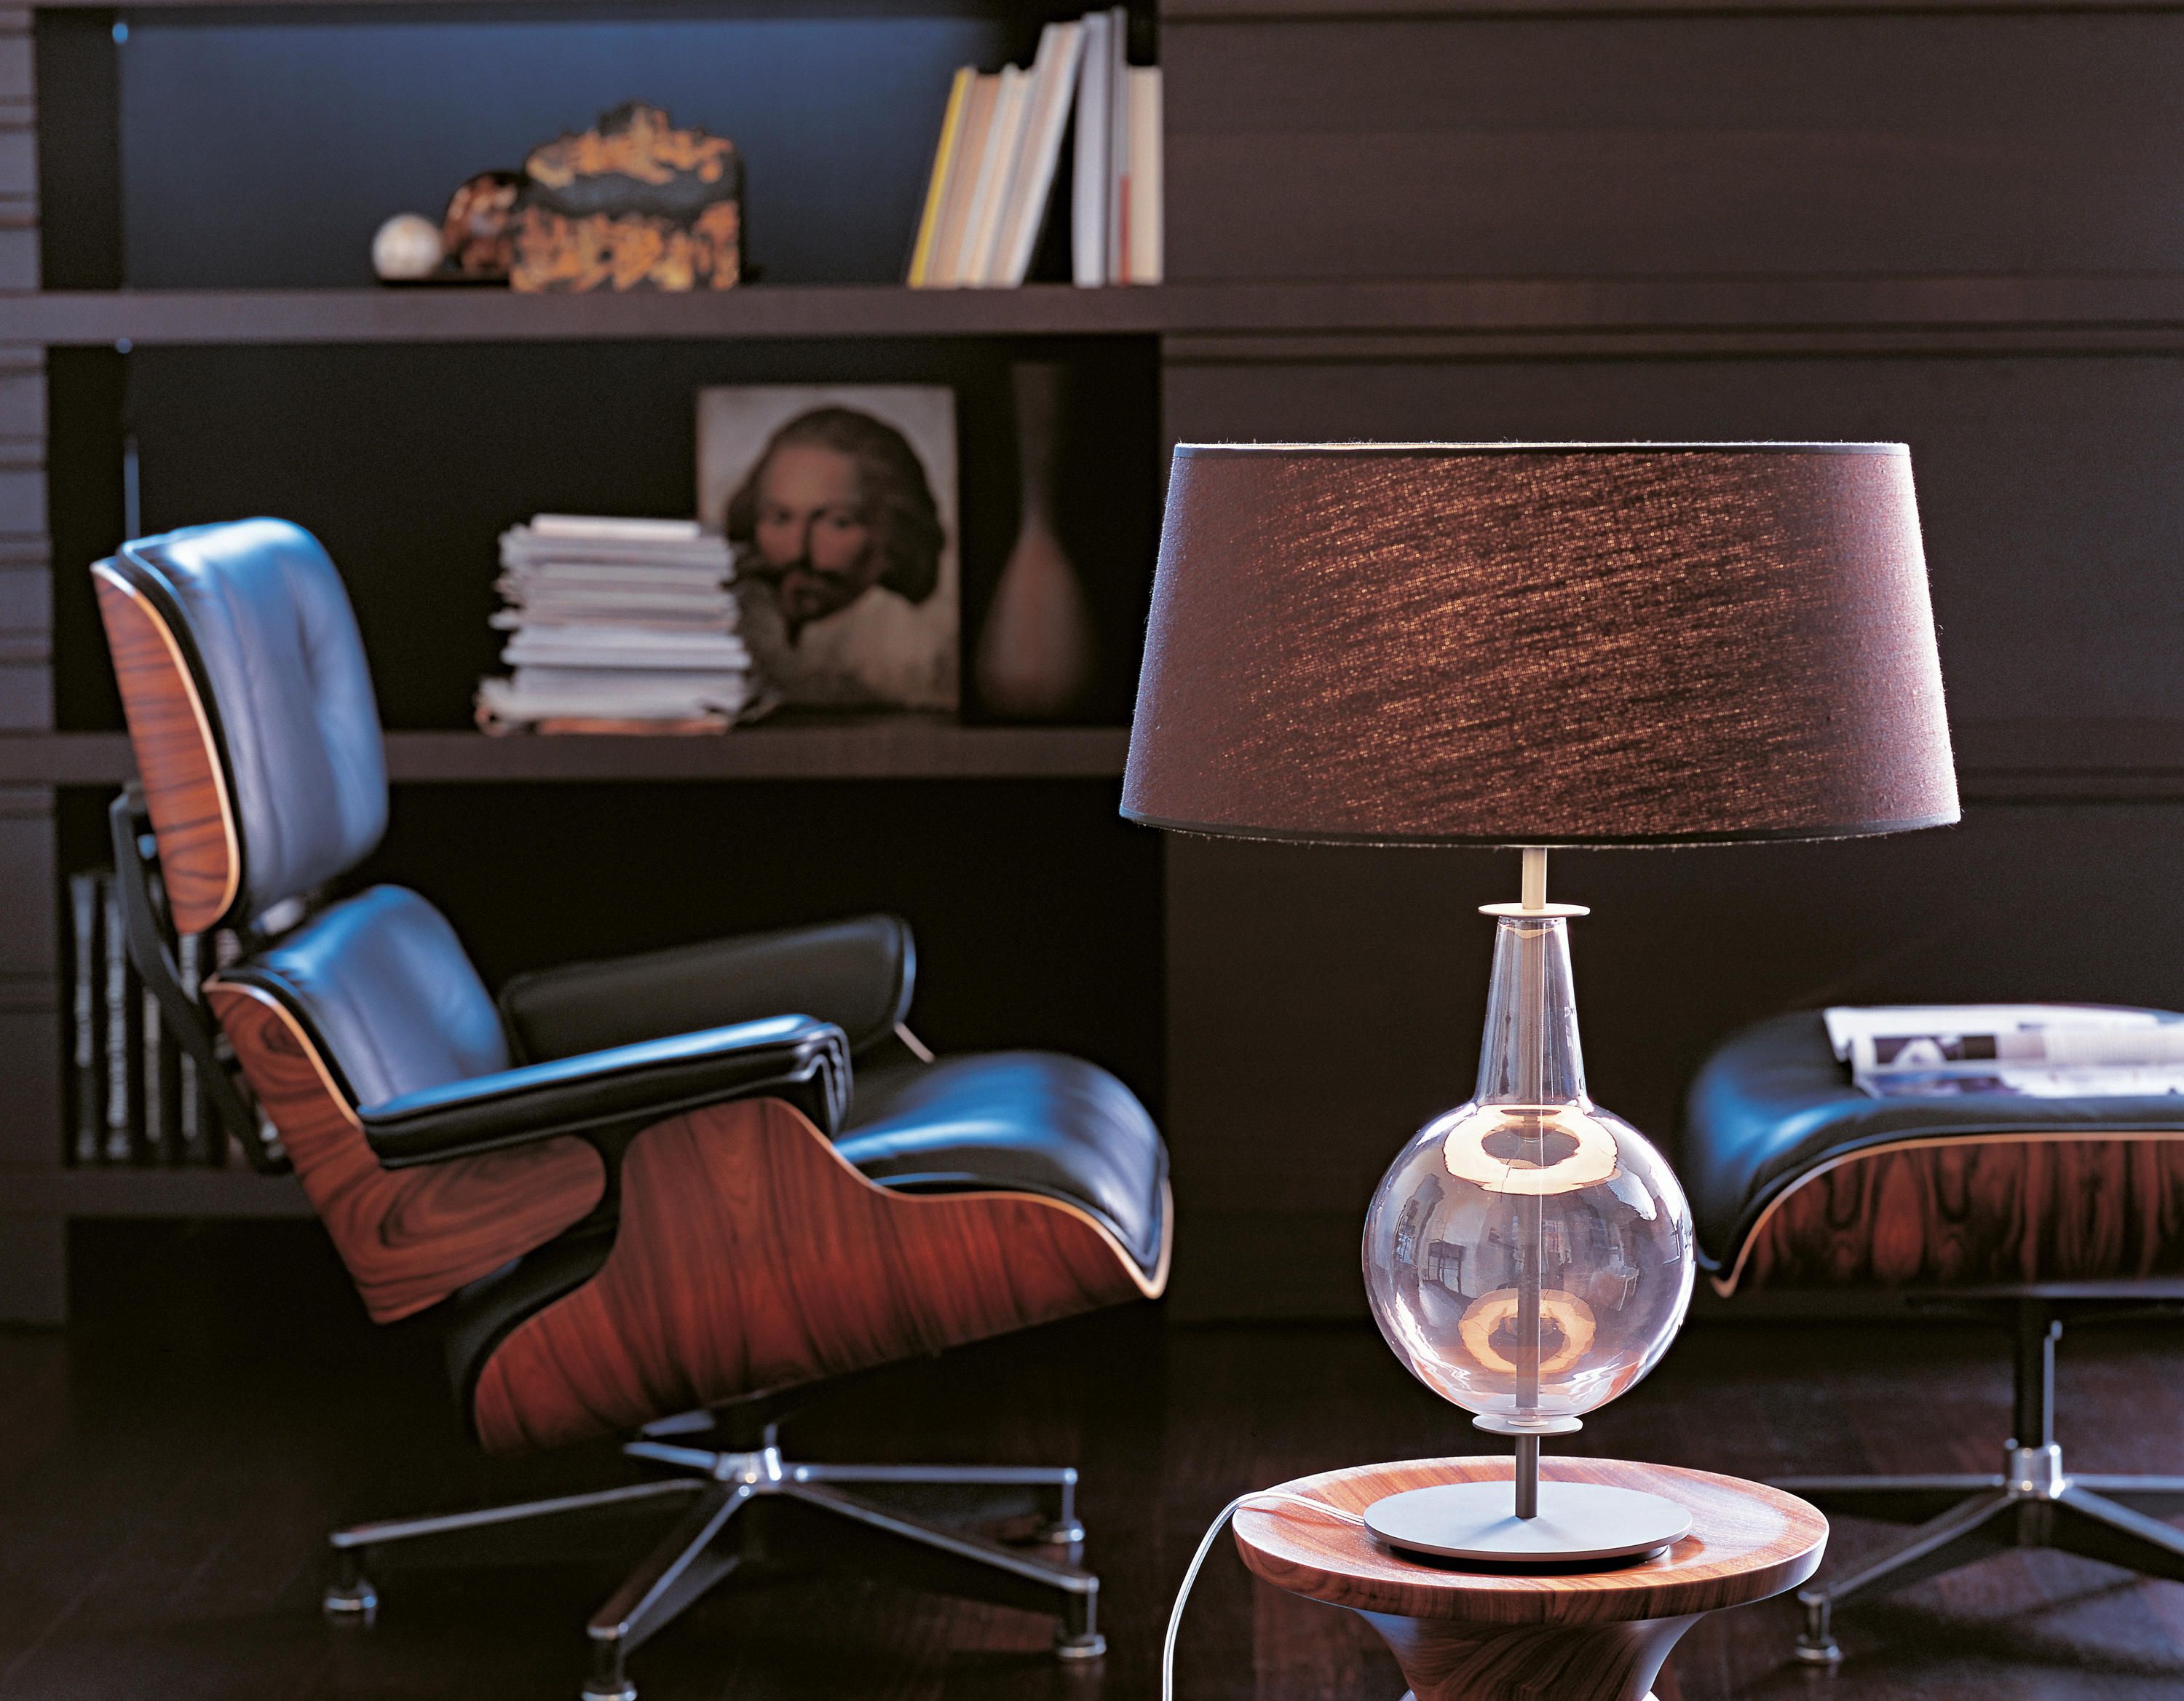 Table lamp New Classic by Penta